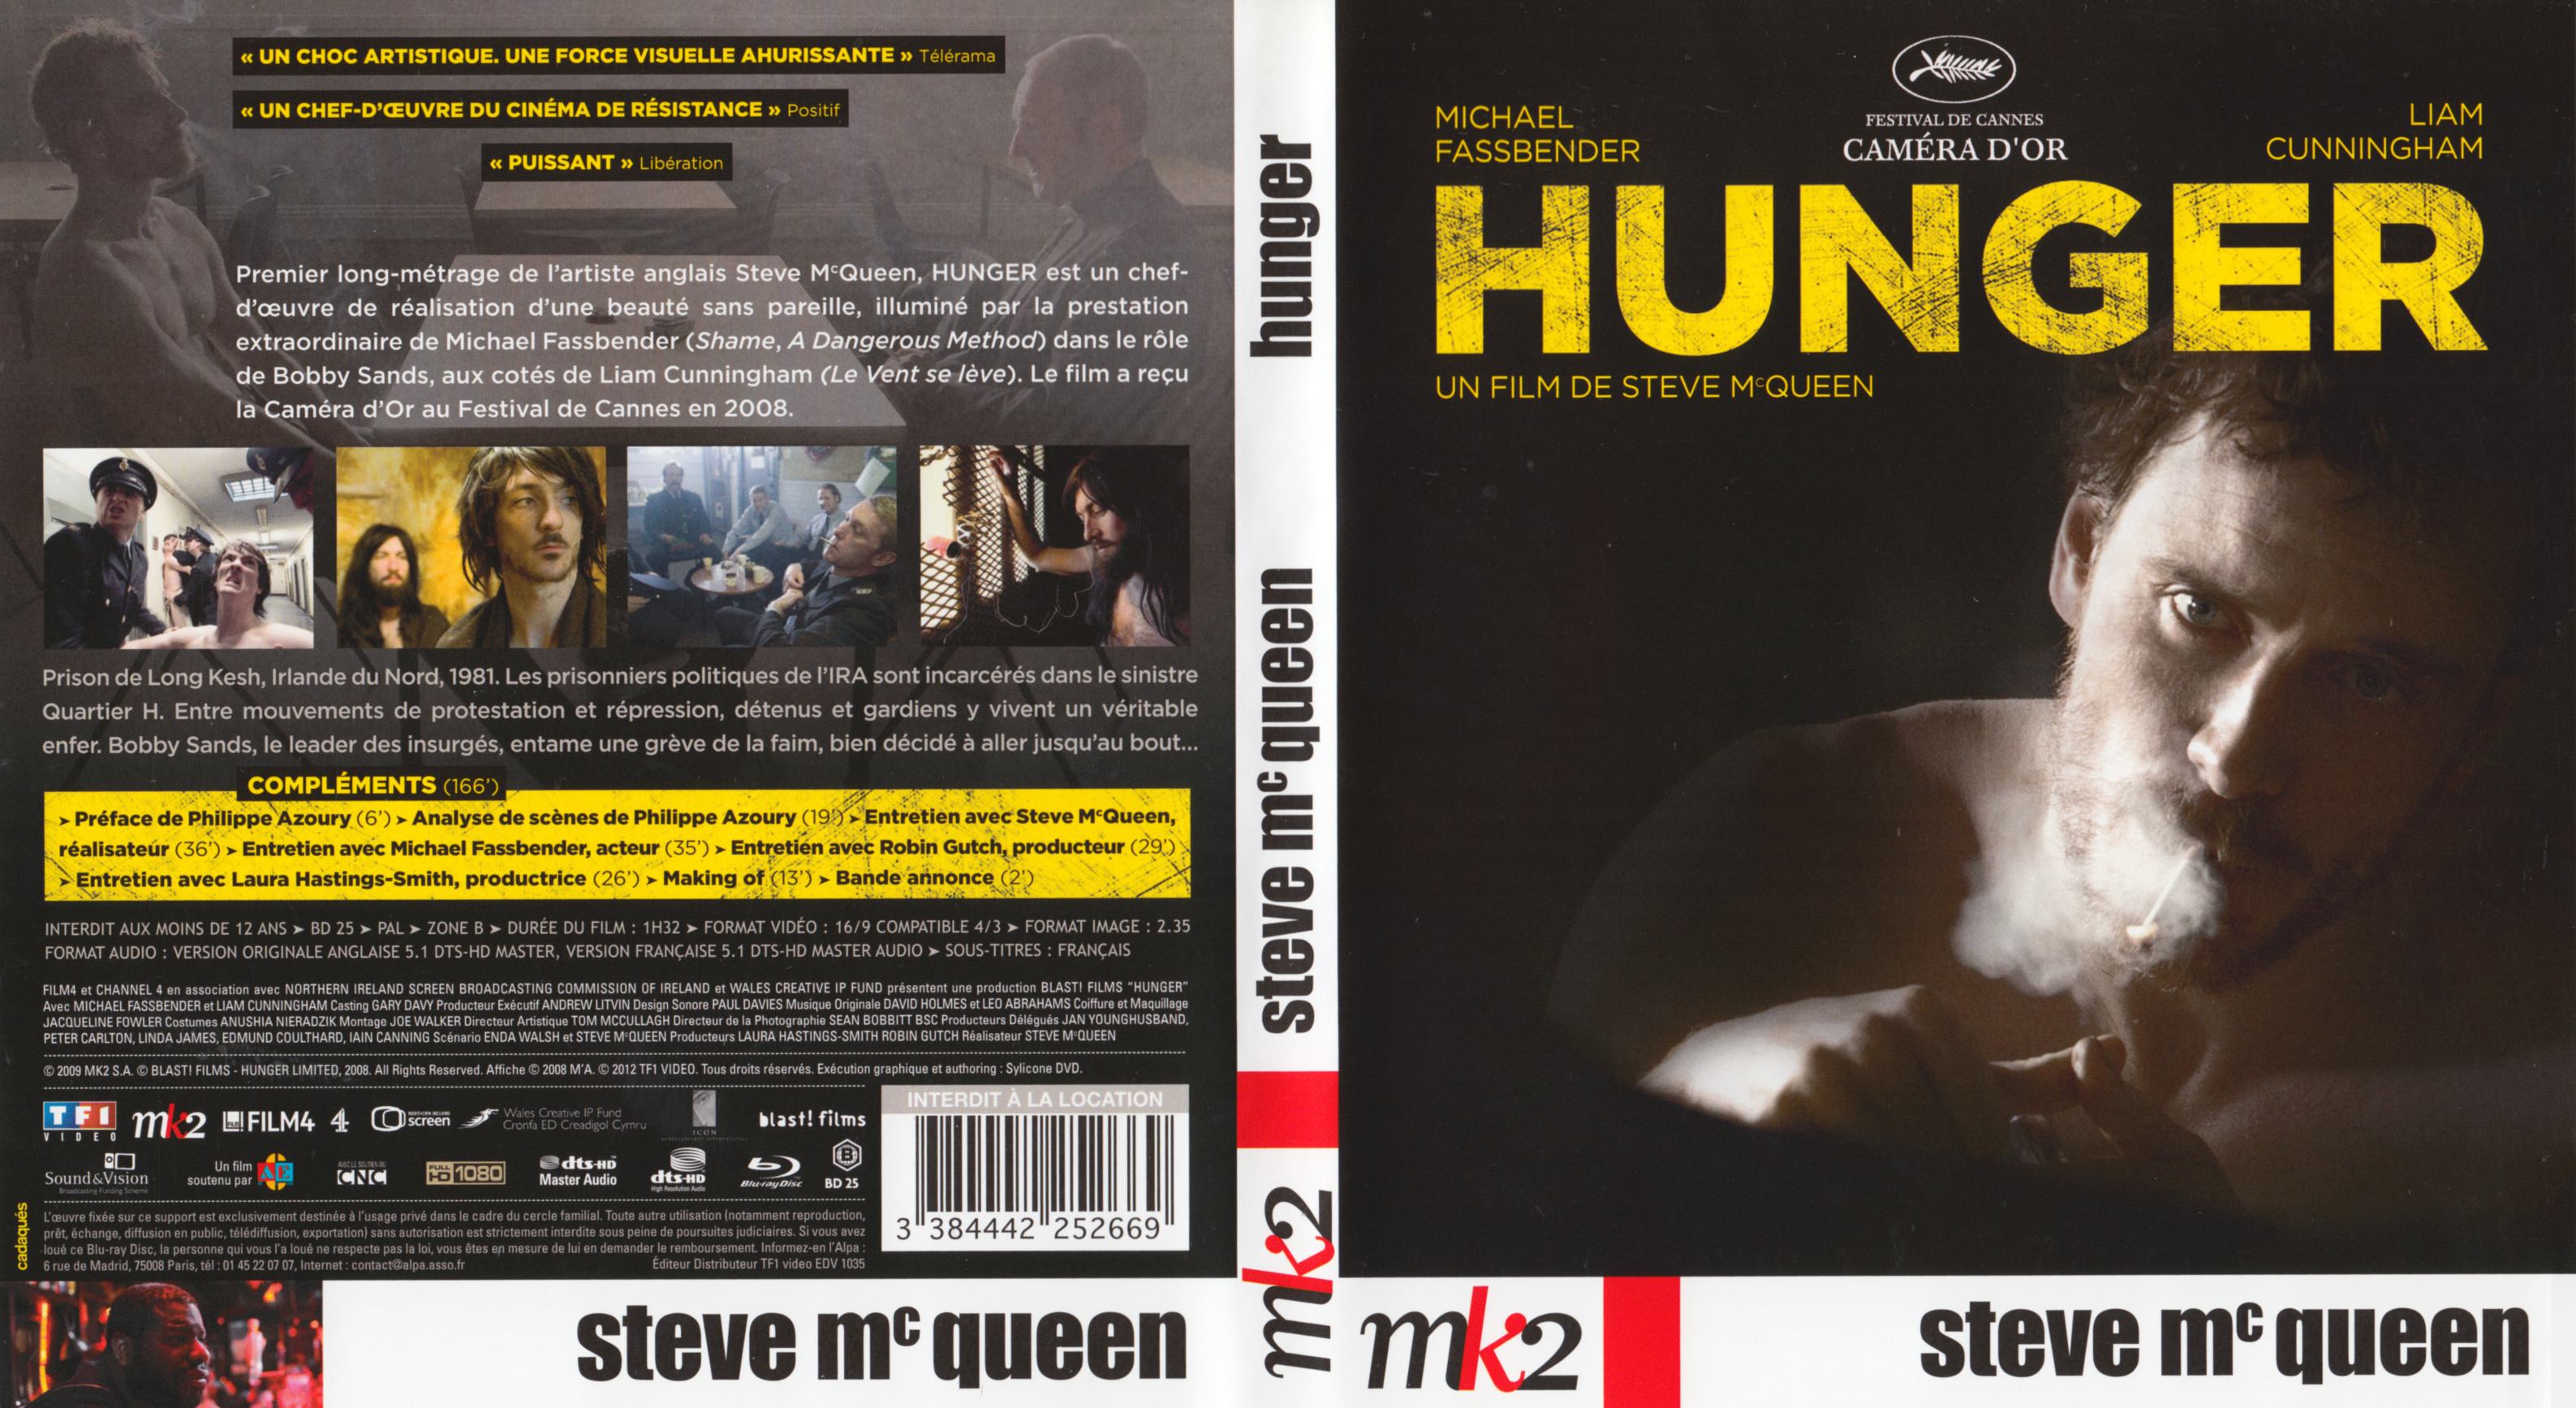 Jaquette DVD Hunger (BLU-RAY)